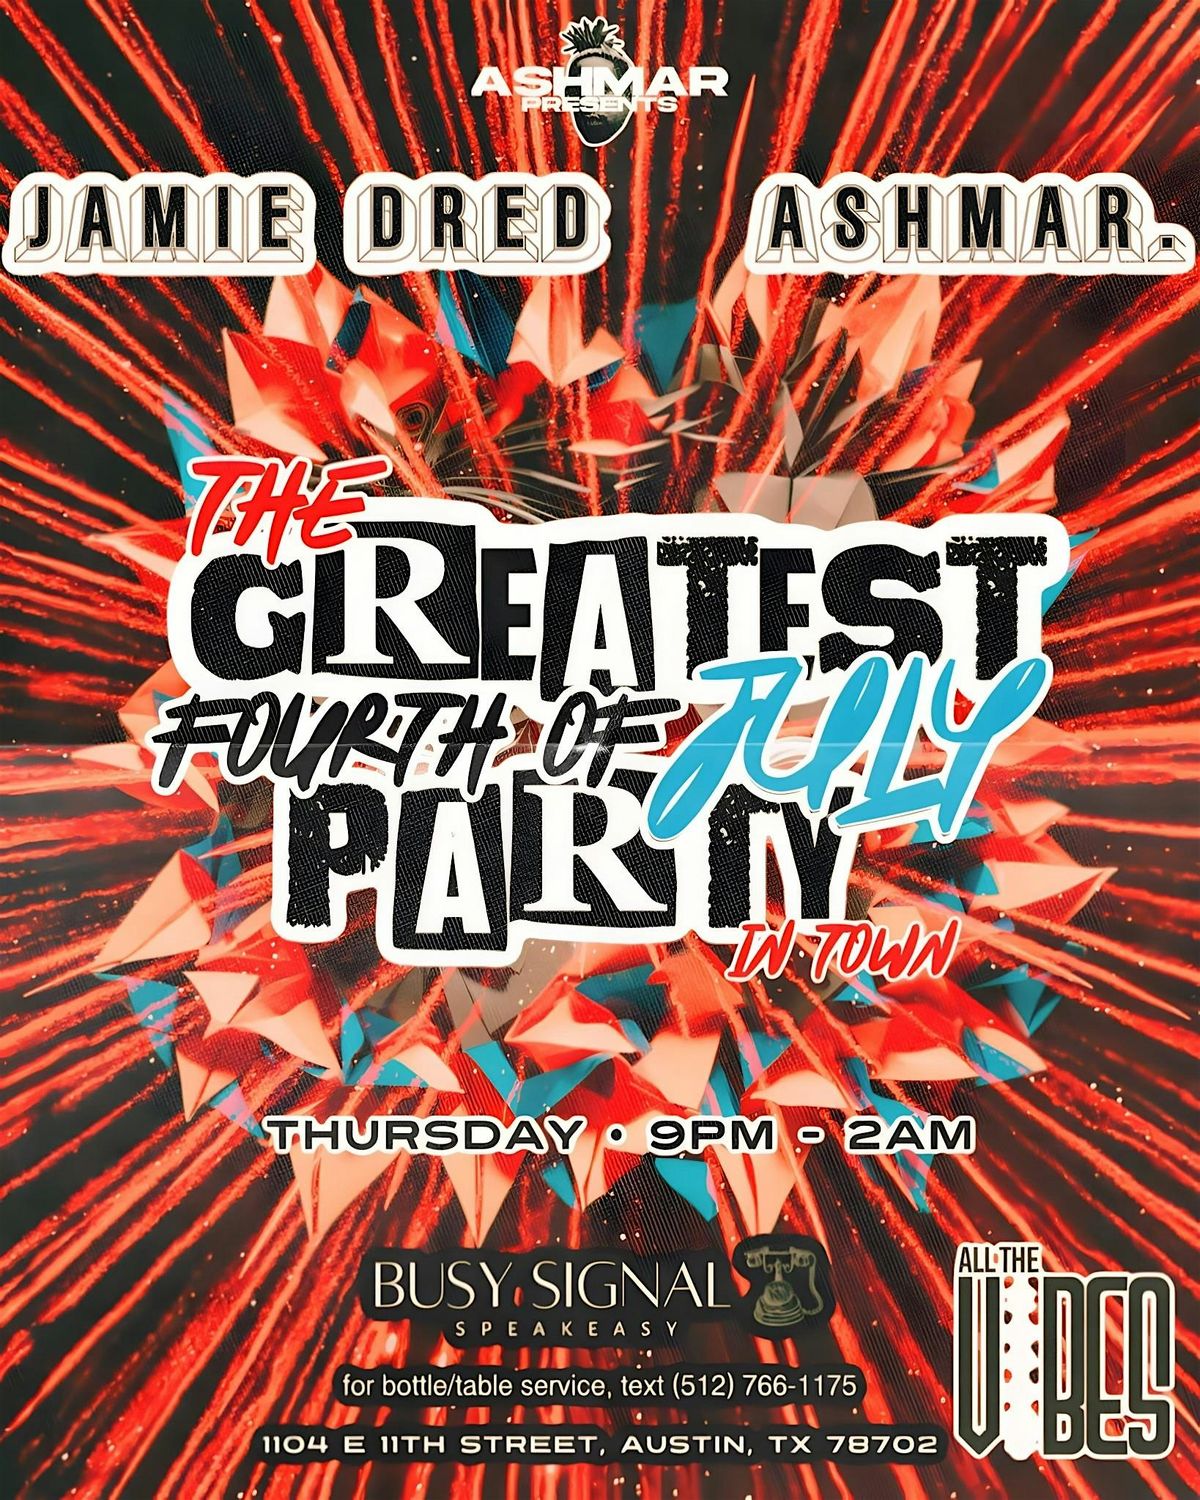 THE GREATEST FOURTH OF JULY PARTY with Ashmar. & Jamie Dred